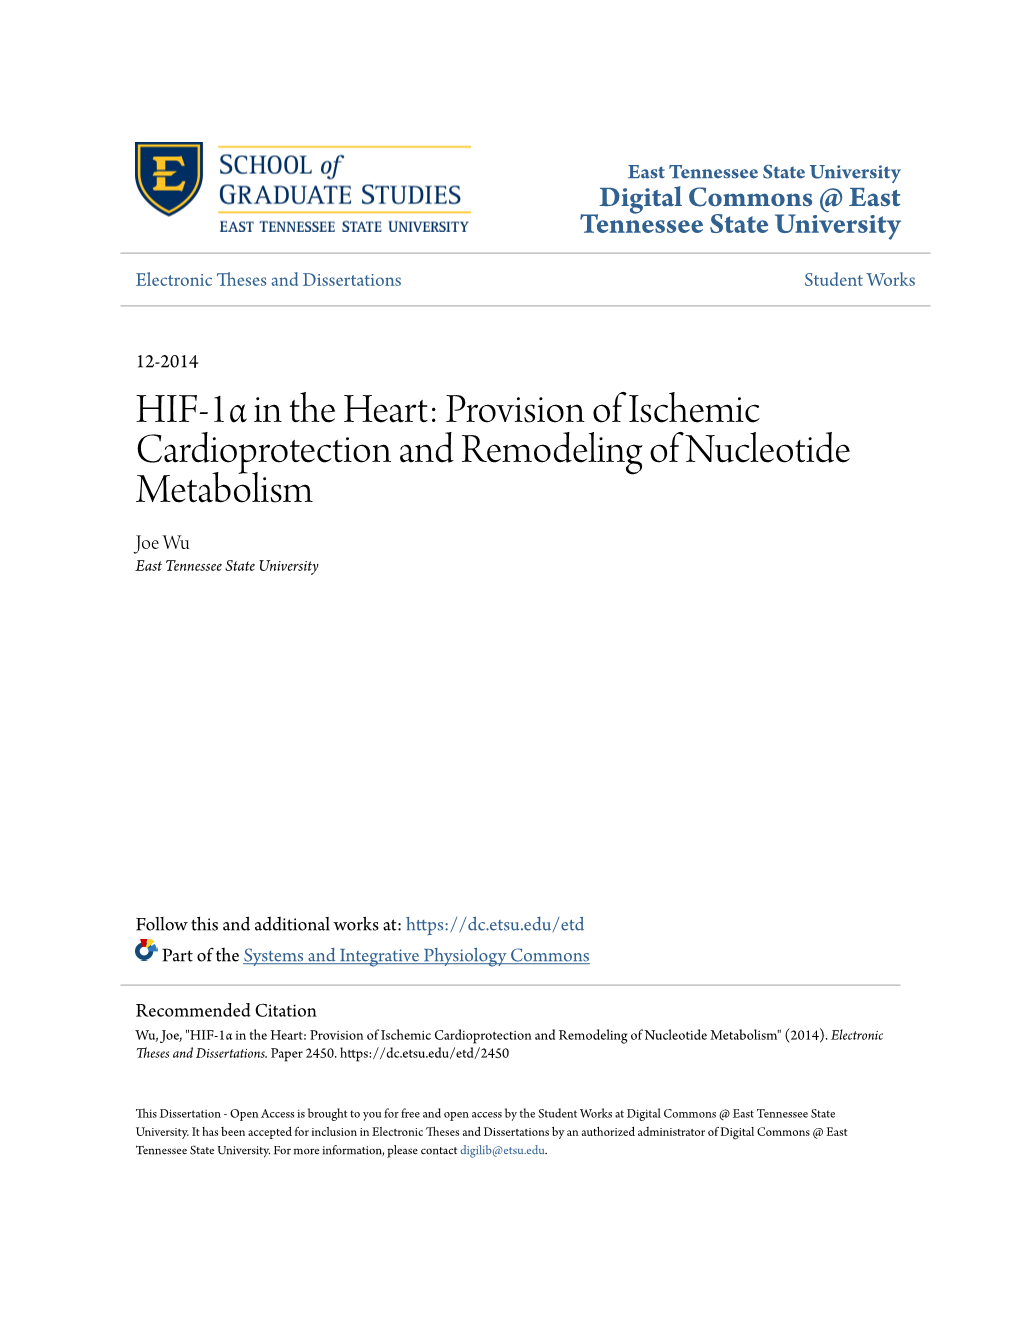 HIF-1Α in the Heart: Provision of Ischemic Cardioprotection and Remodeling of Nucleotide Metabolism Joe Wu East Tennessee State University